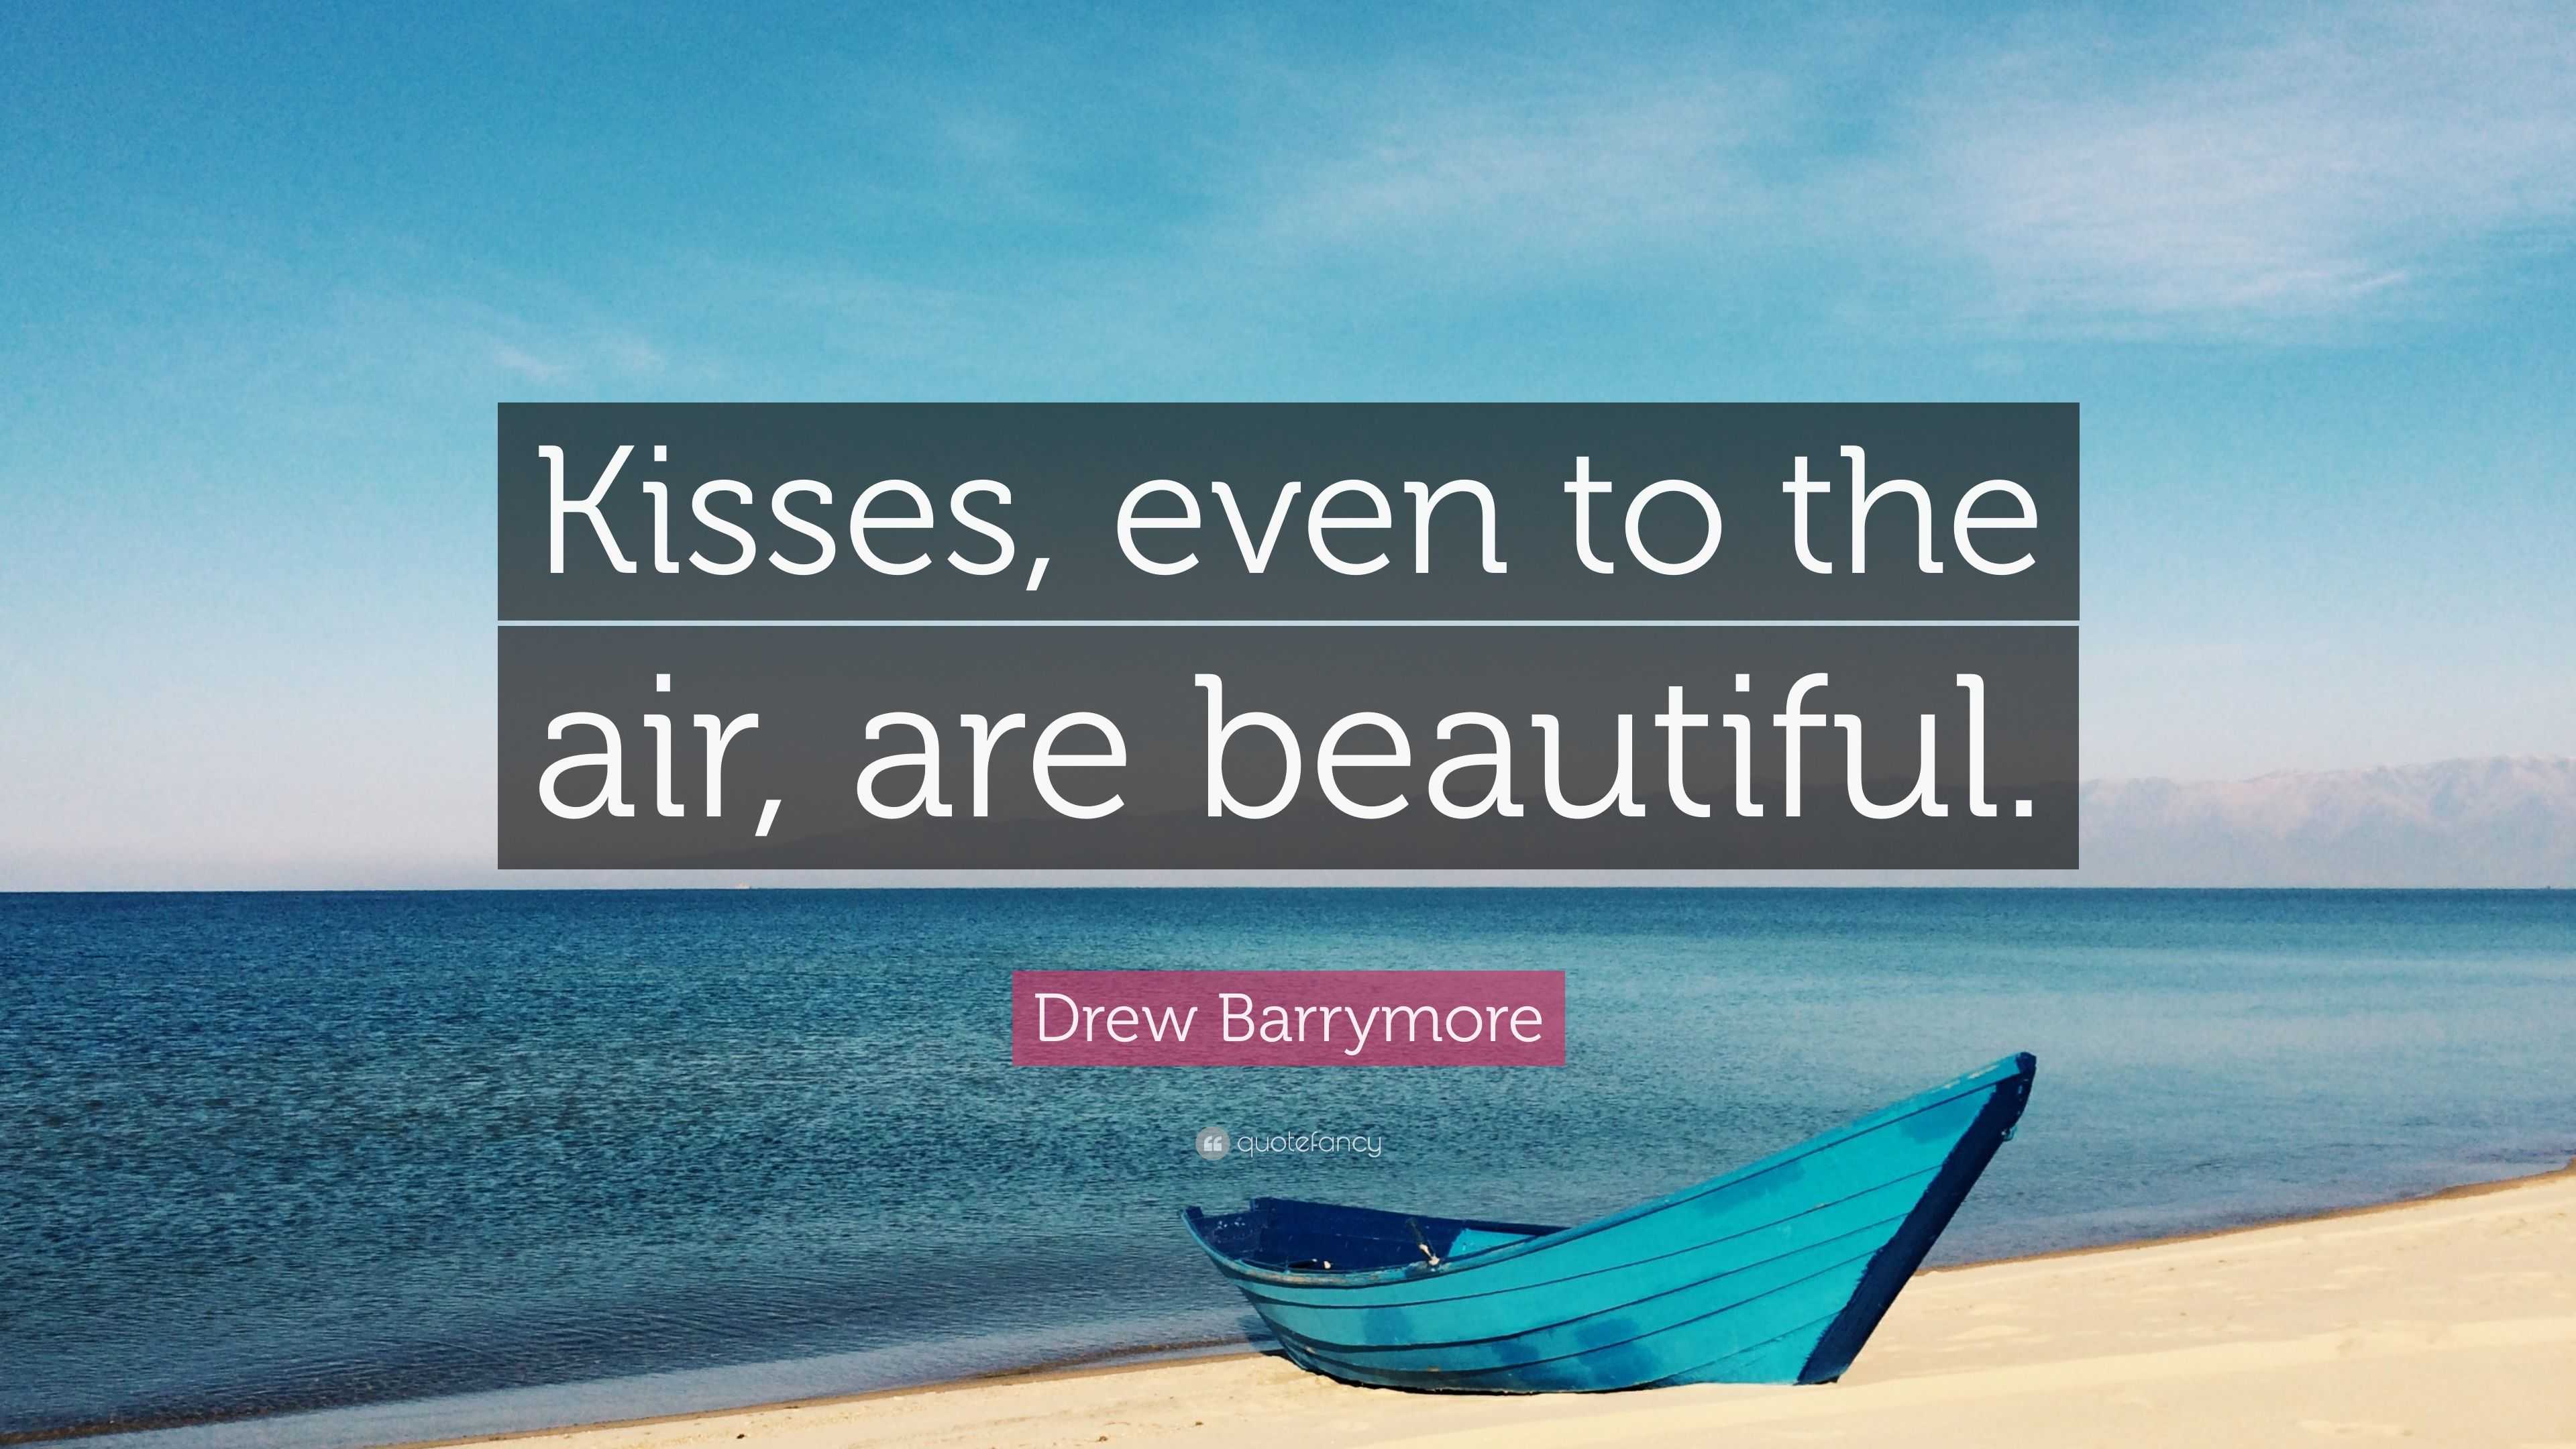 Drew Barrymore - Kisses, even to the air, are beautiful.